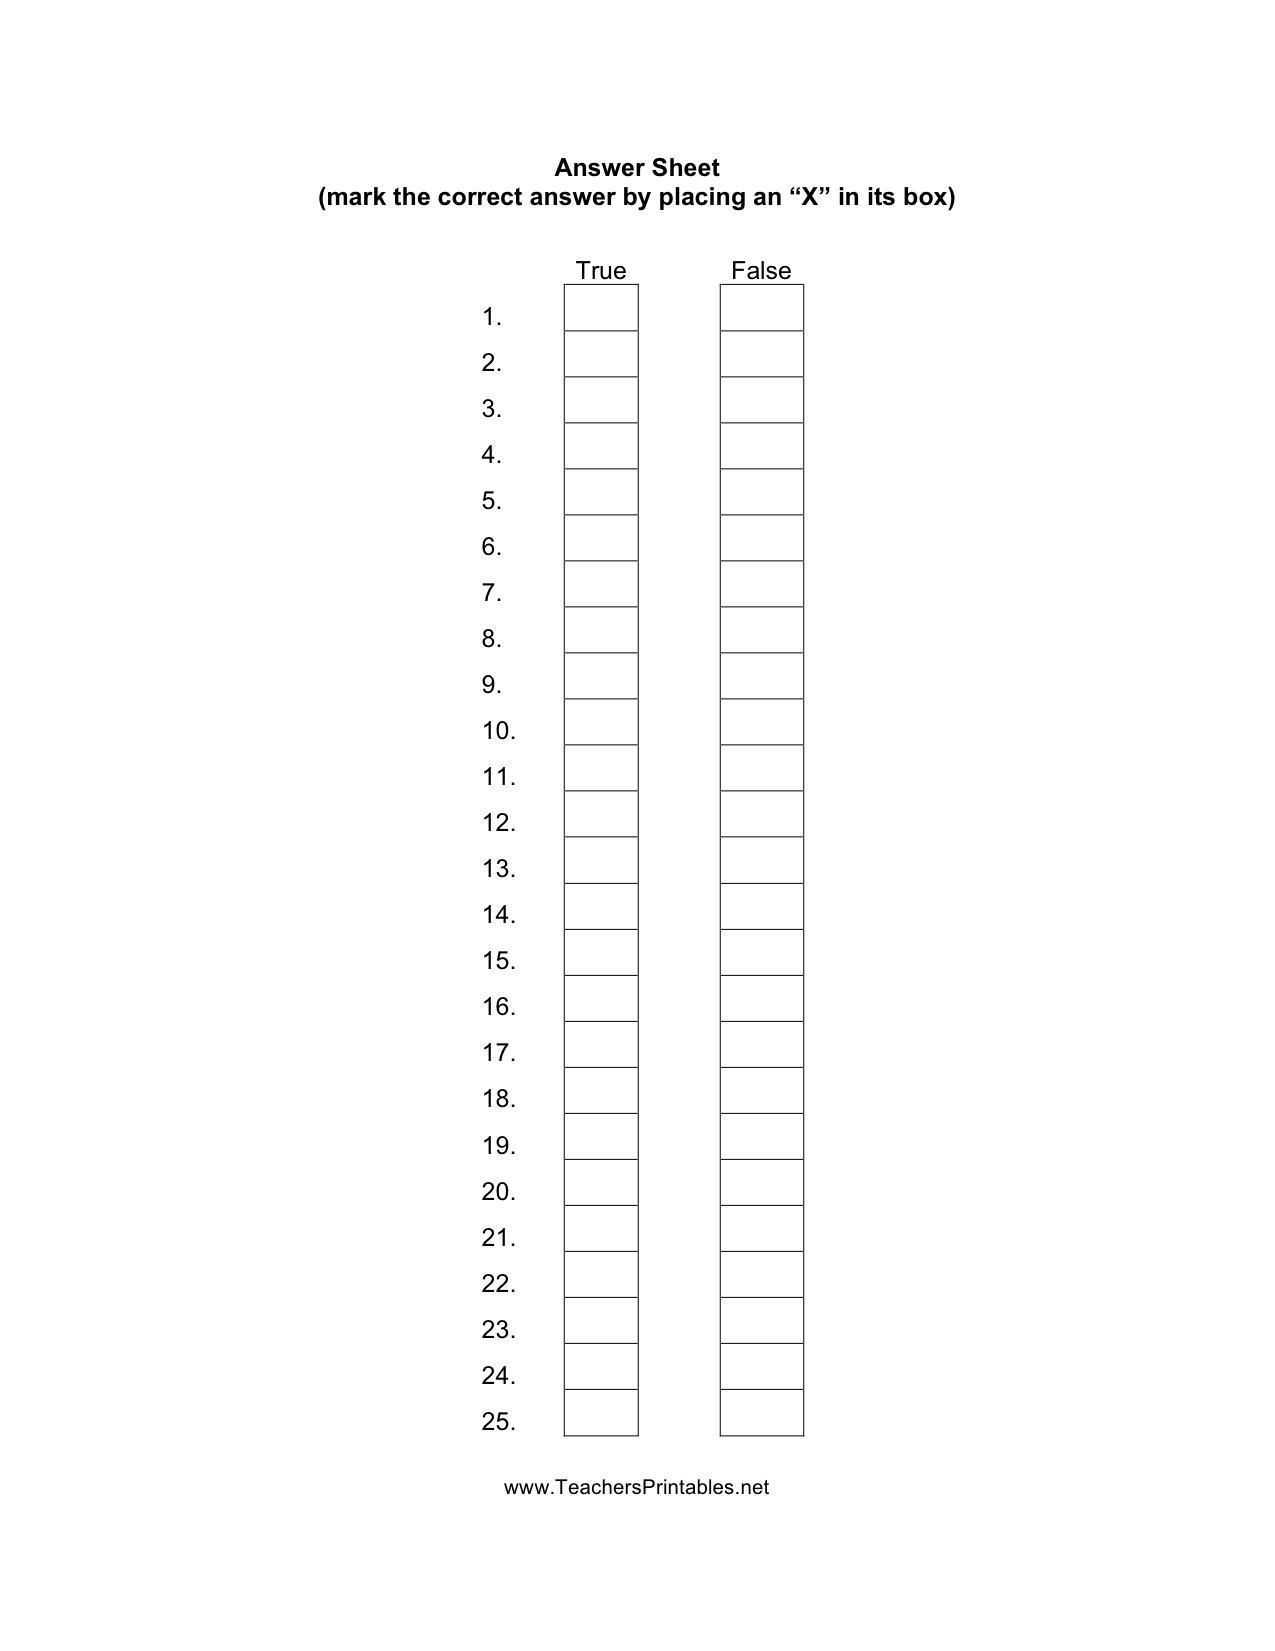 Calculating Power Worksheet Answer Key as Well as Velocity and Acceleration Calculation Worksheet Answers Gallery